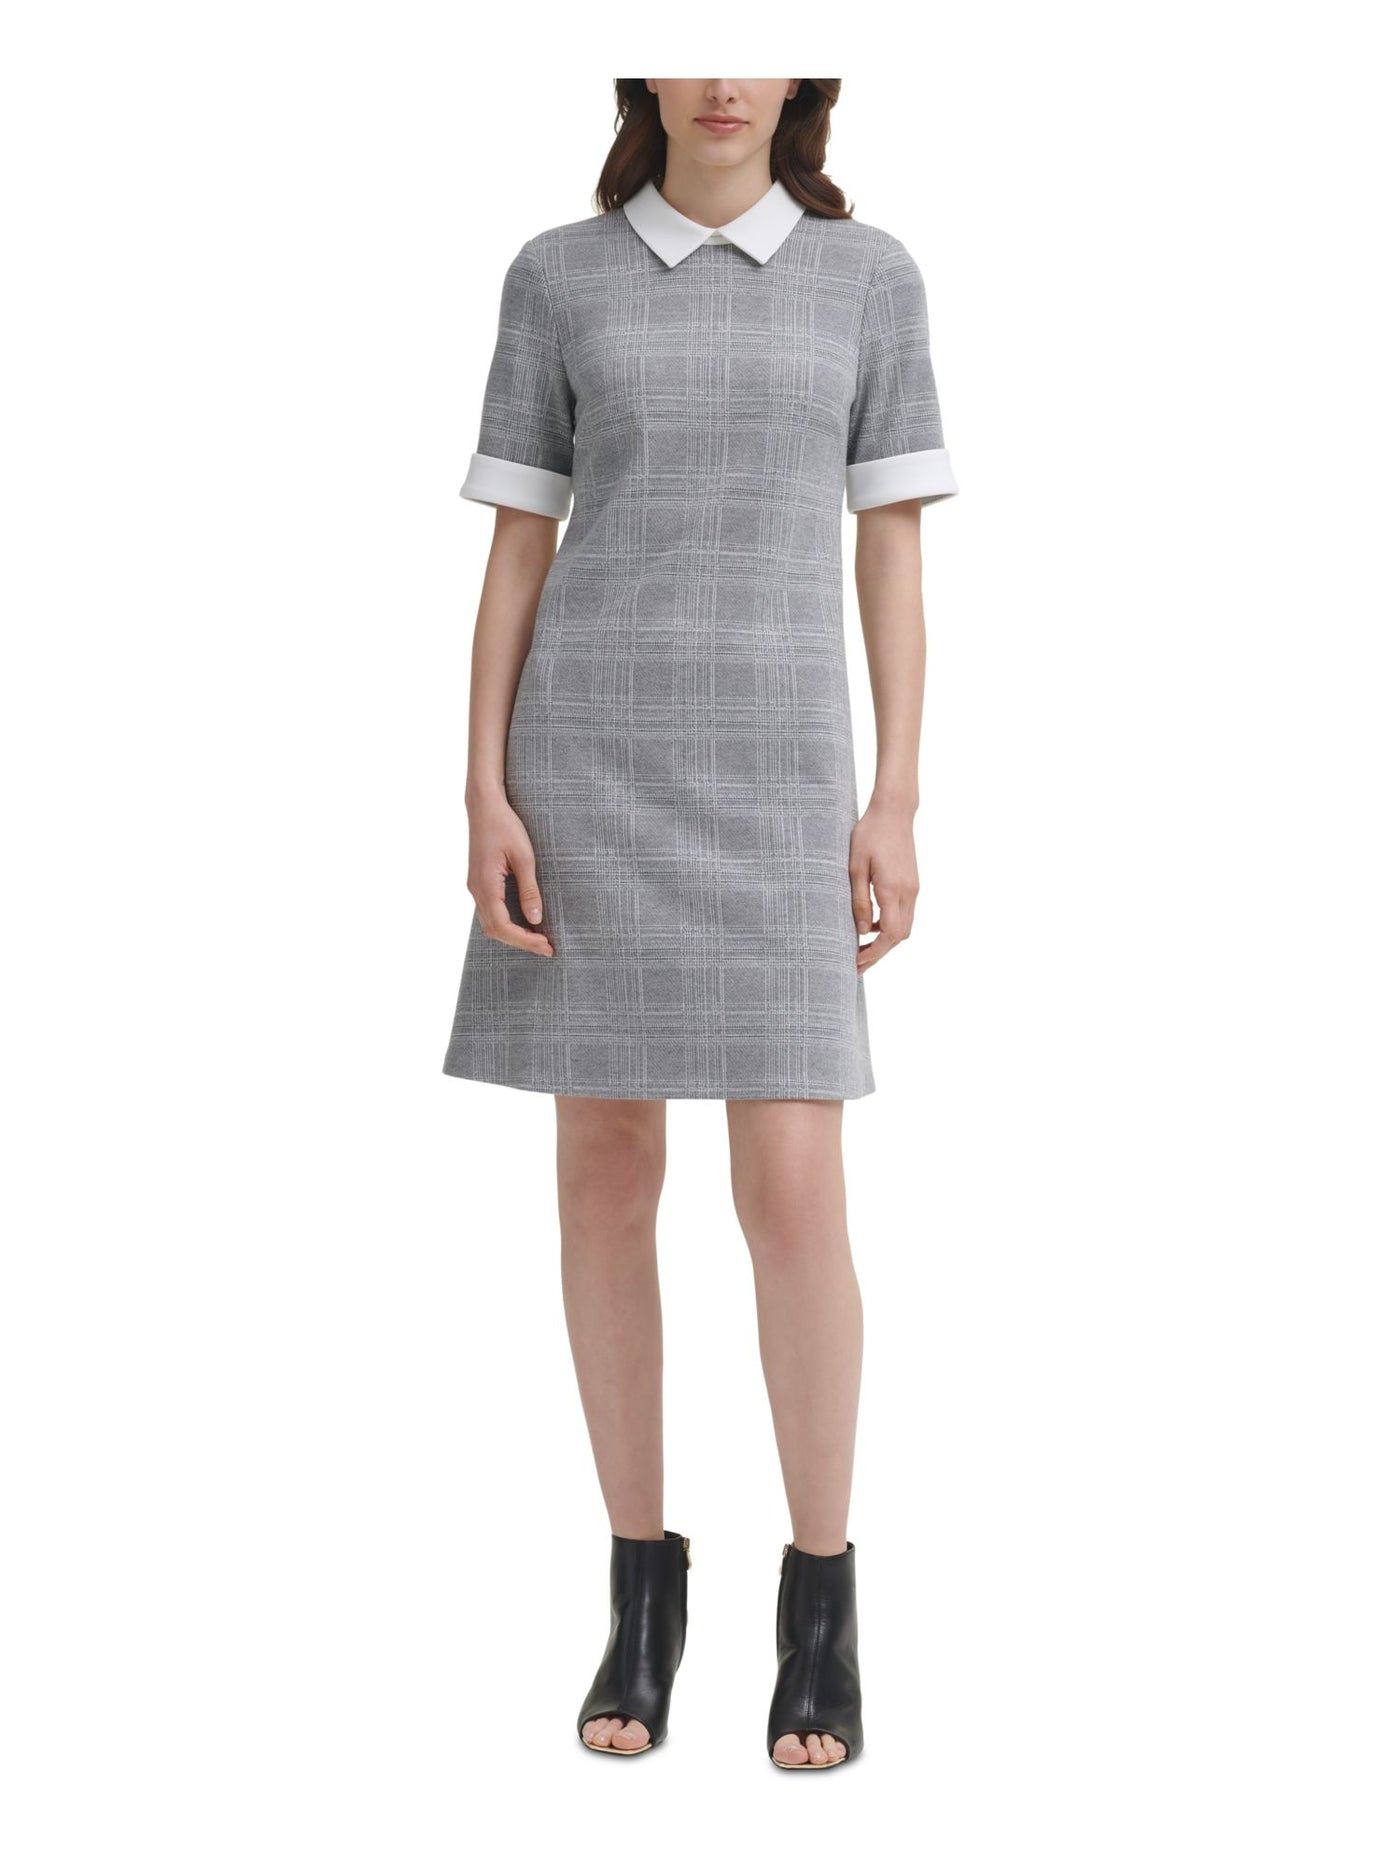 DKNY Womens Gray Stretch Zippered Plaid Short Sleeve Point Collar Above The Knee Wear To Work Shirt Dress 6